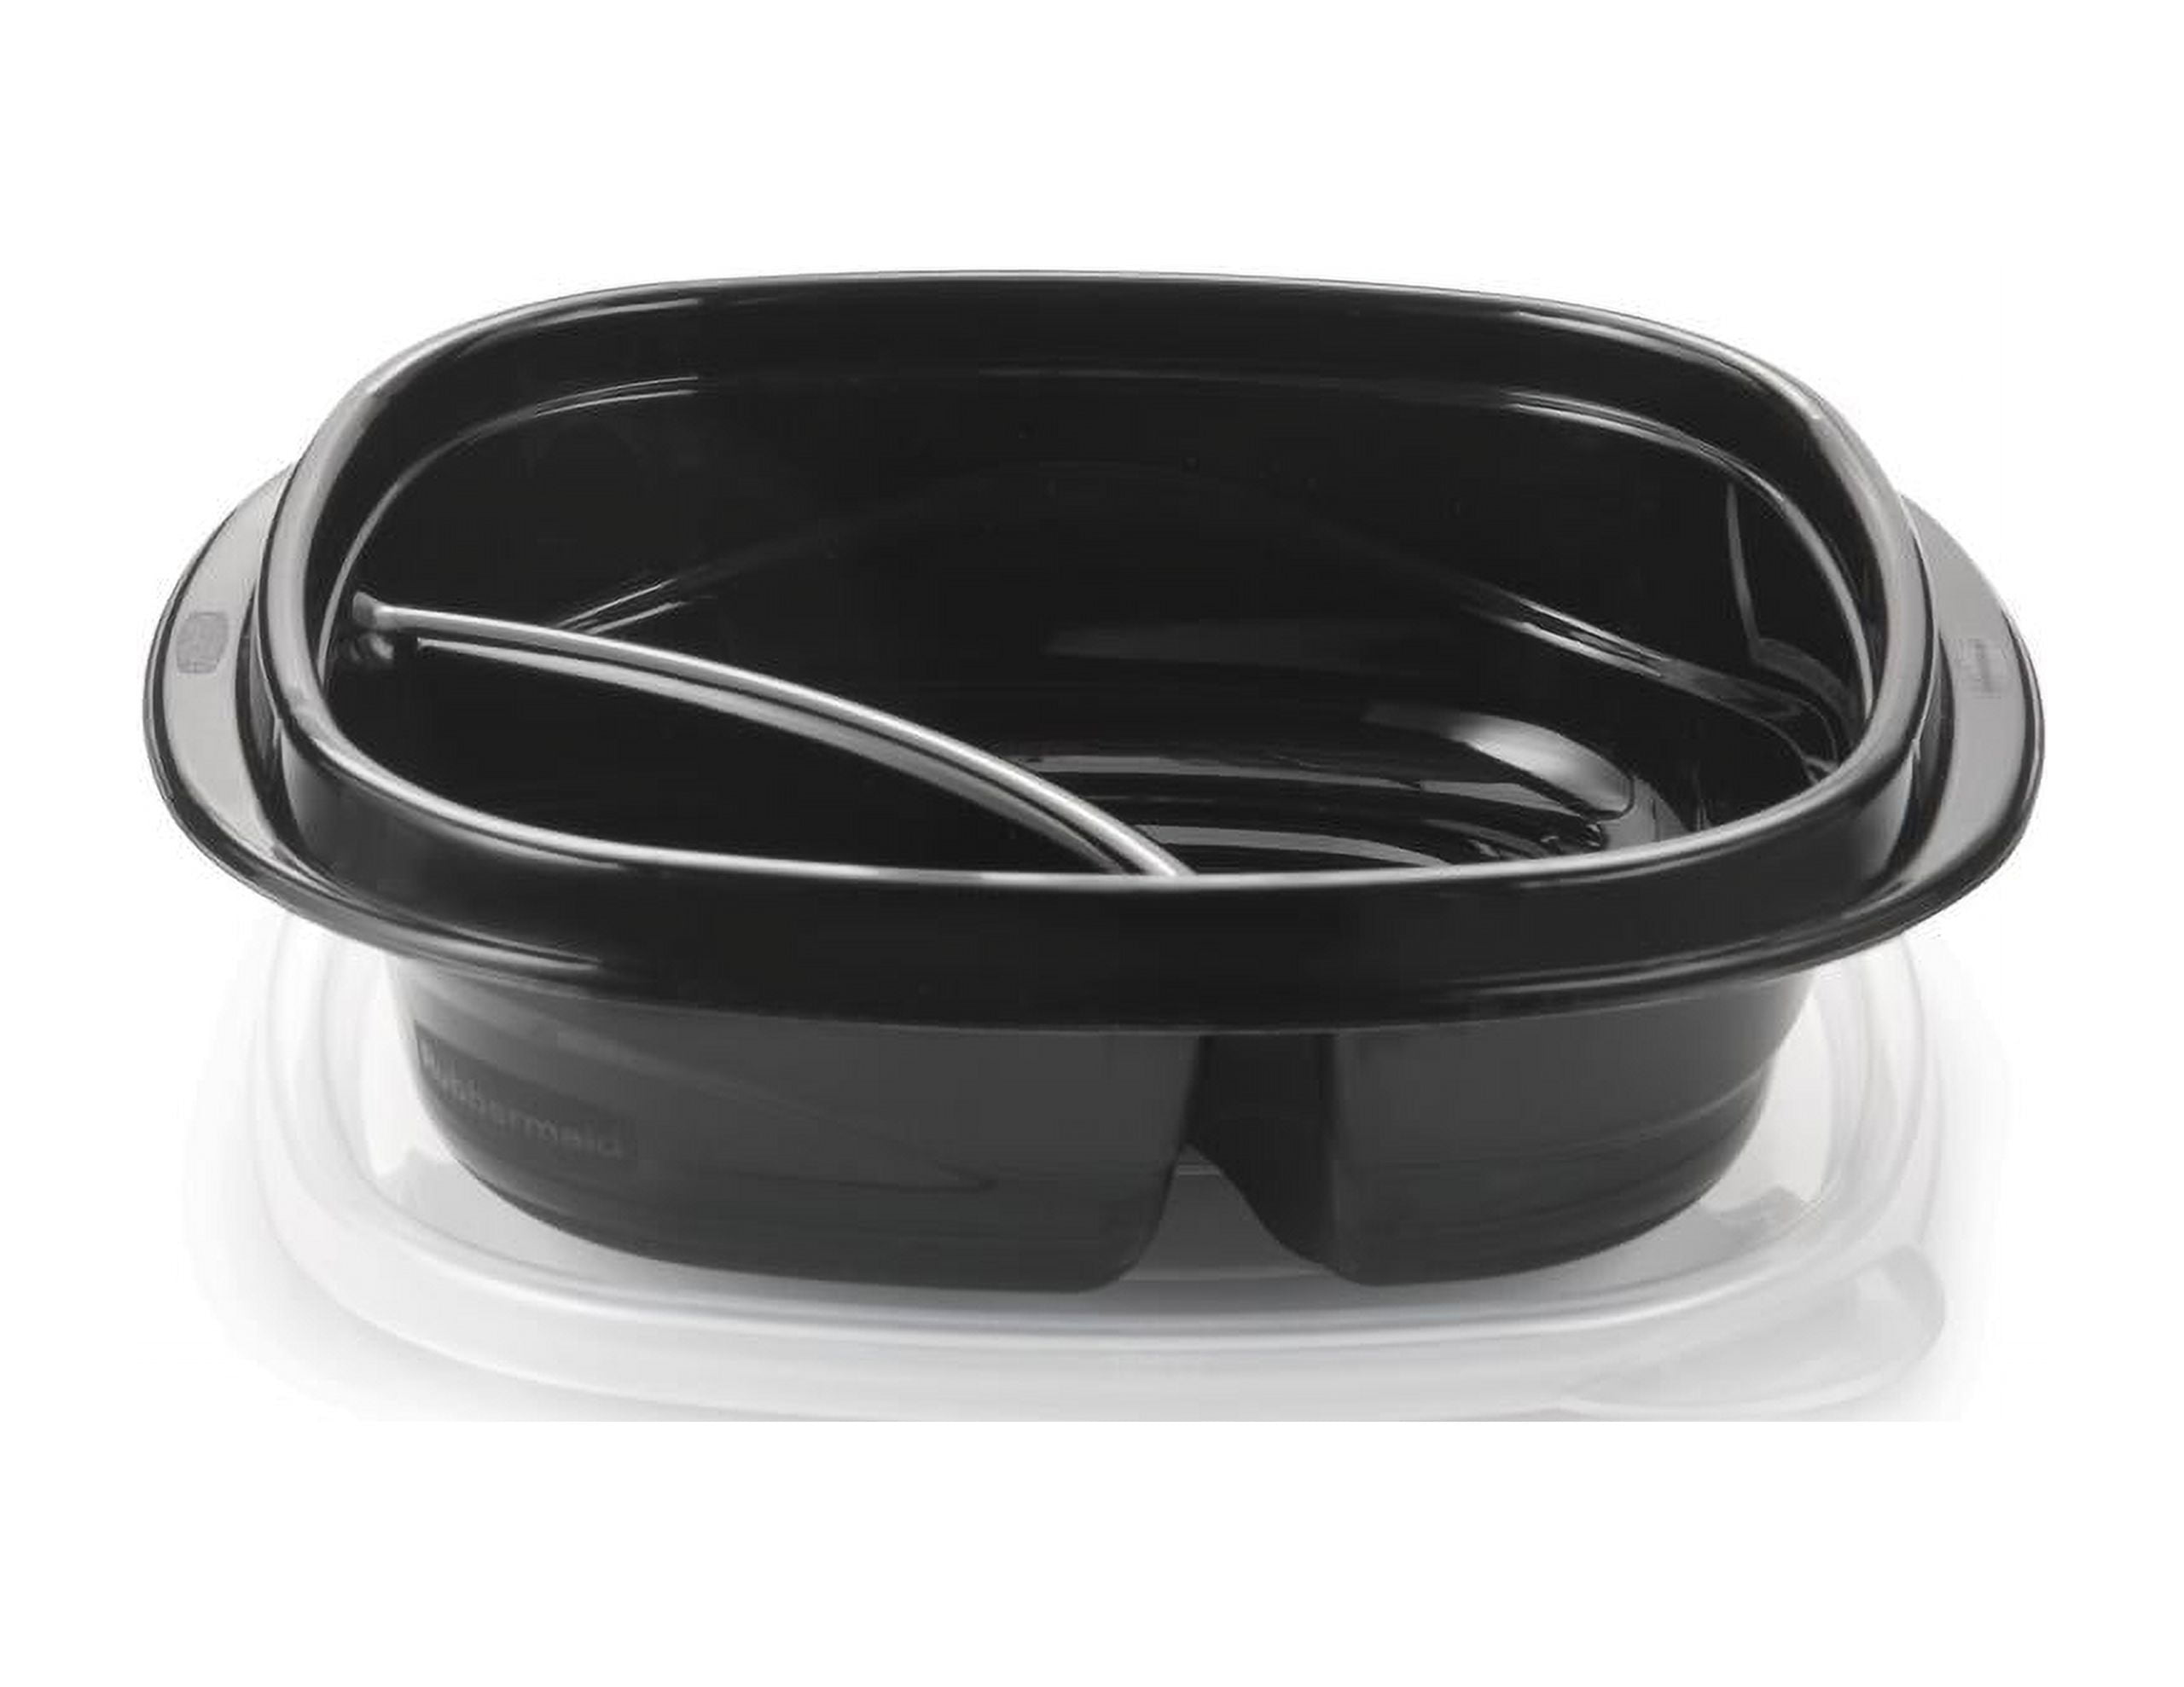 5720 2 Qt Round Rubbermaid® Food Storage Container - Basco USA